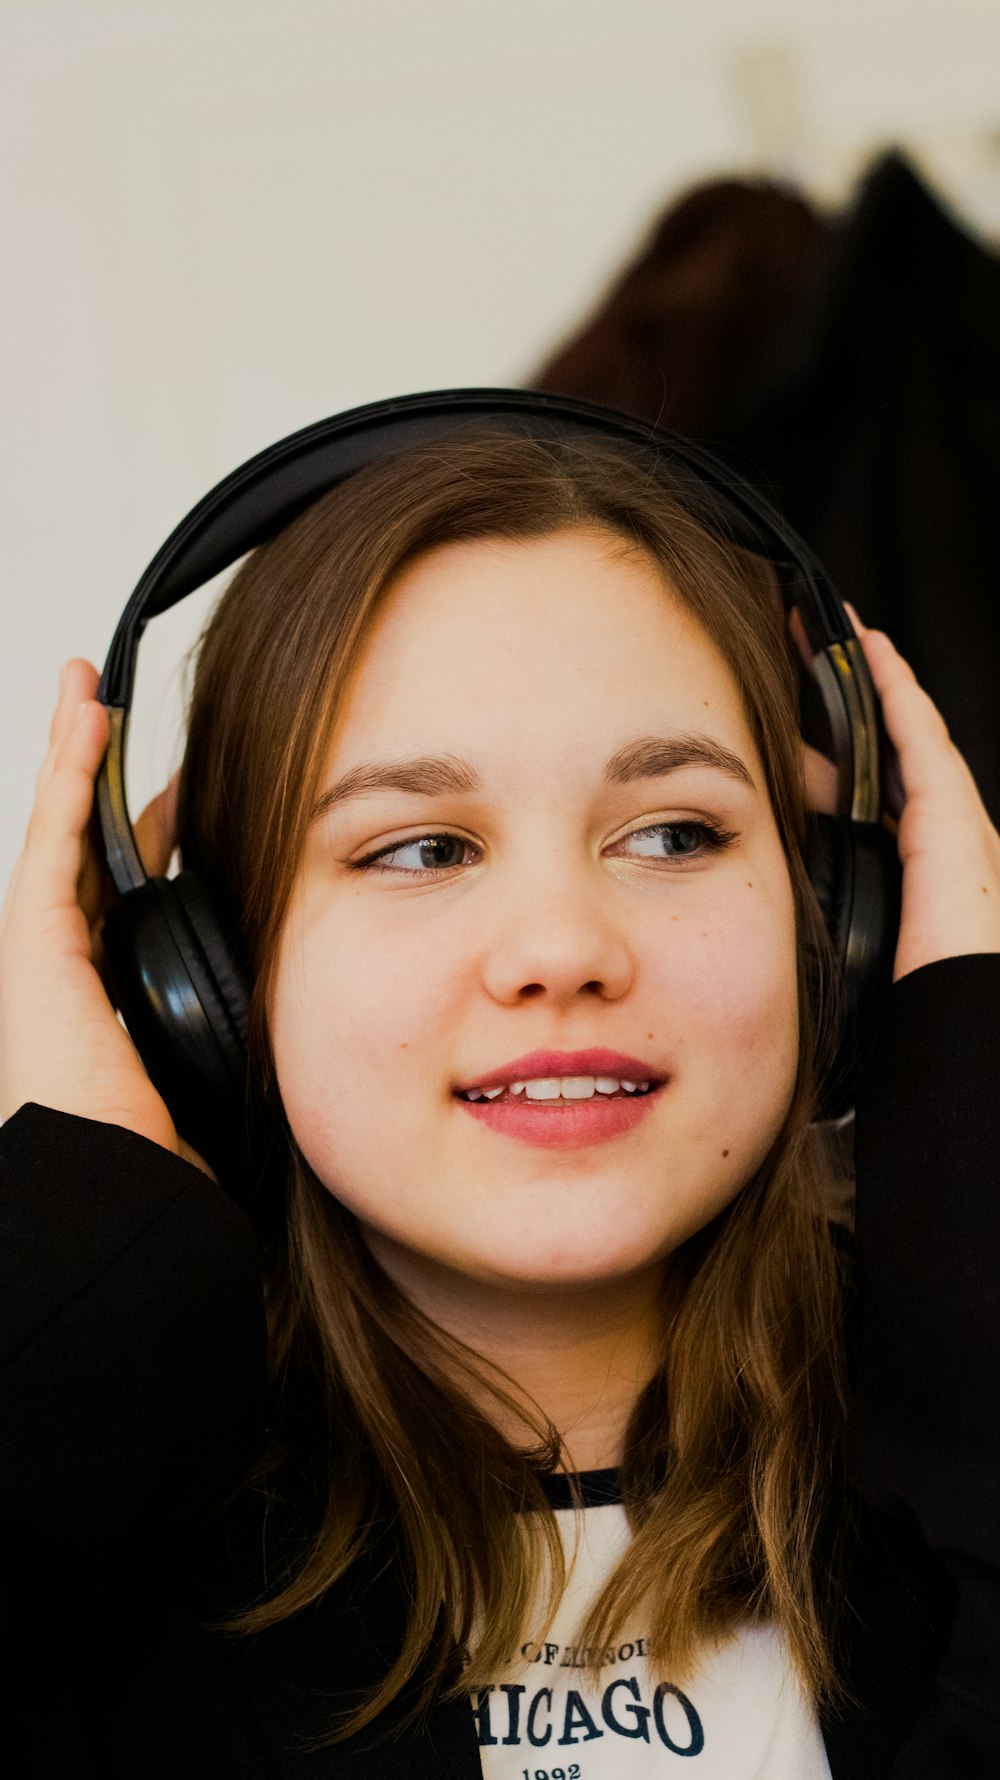 a girl with headphones on her ears